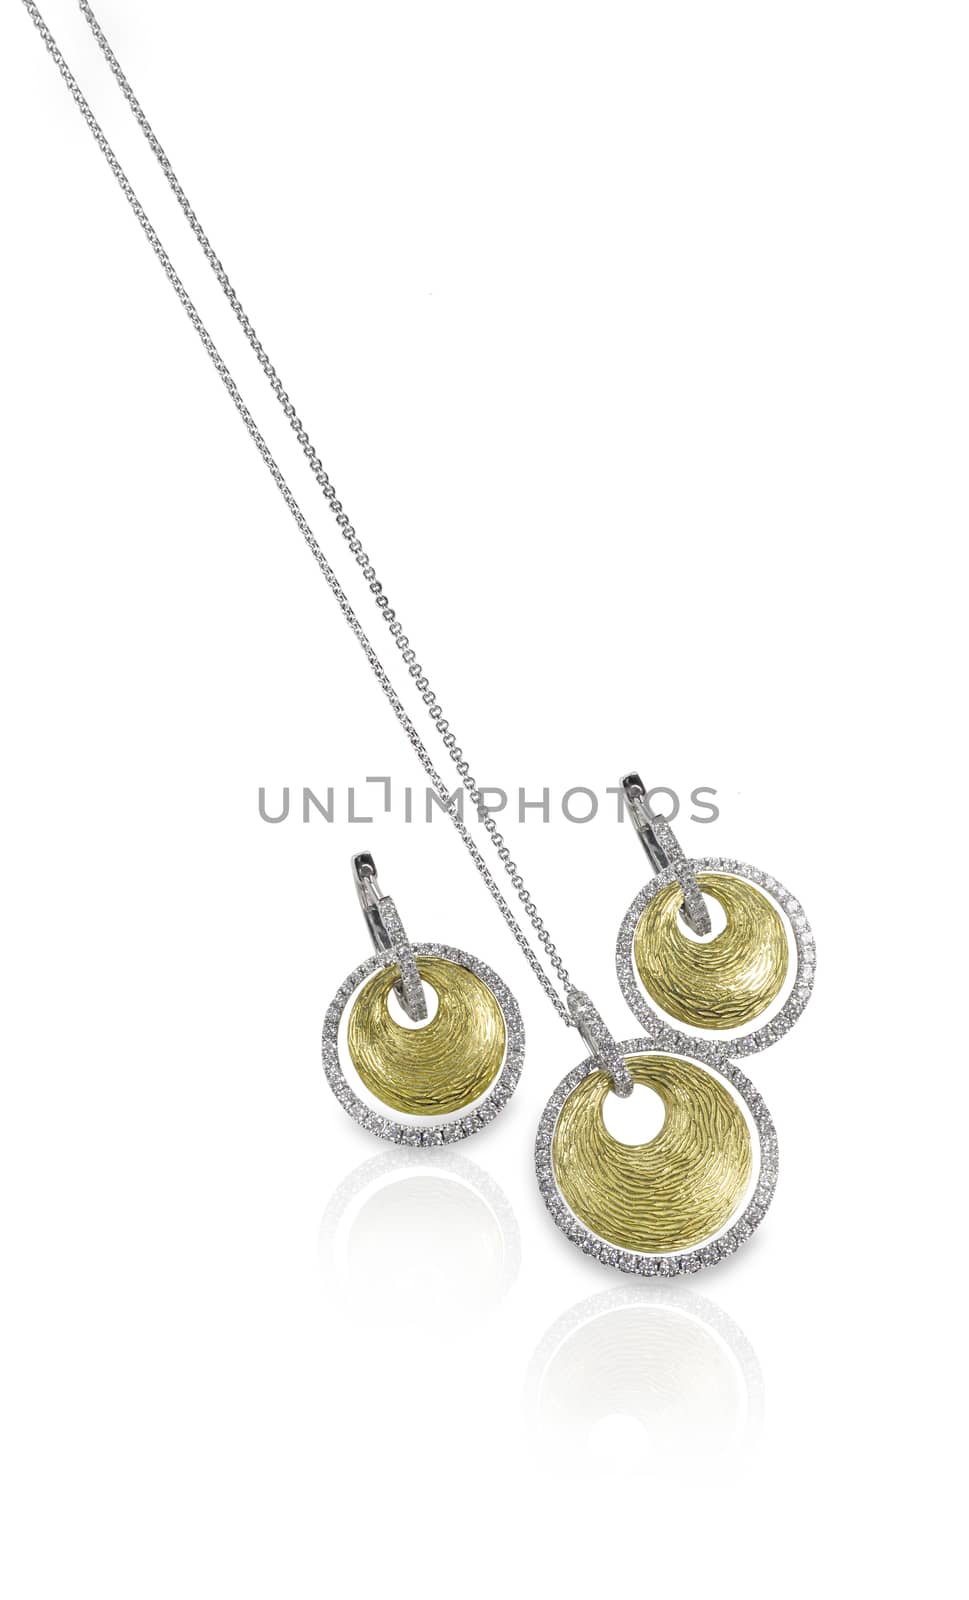 Diamond white and yellow gold fashion necklace and earring set by fruitcocktail